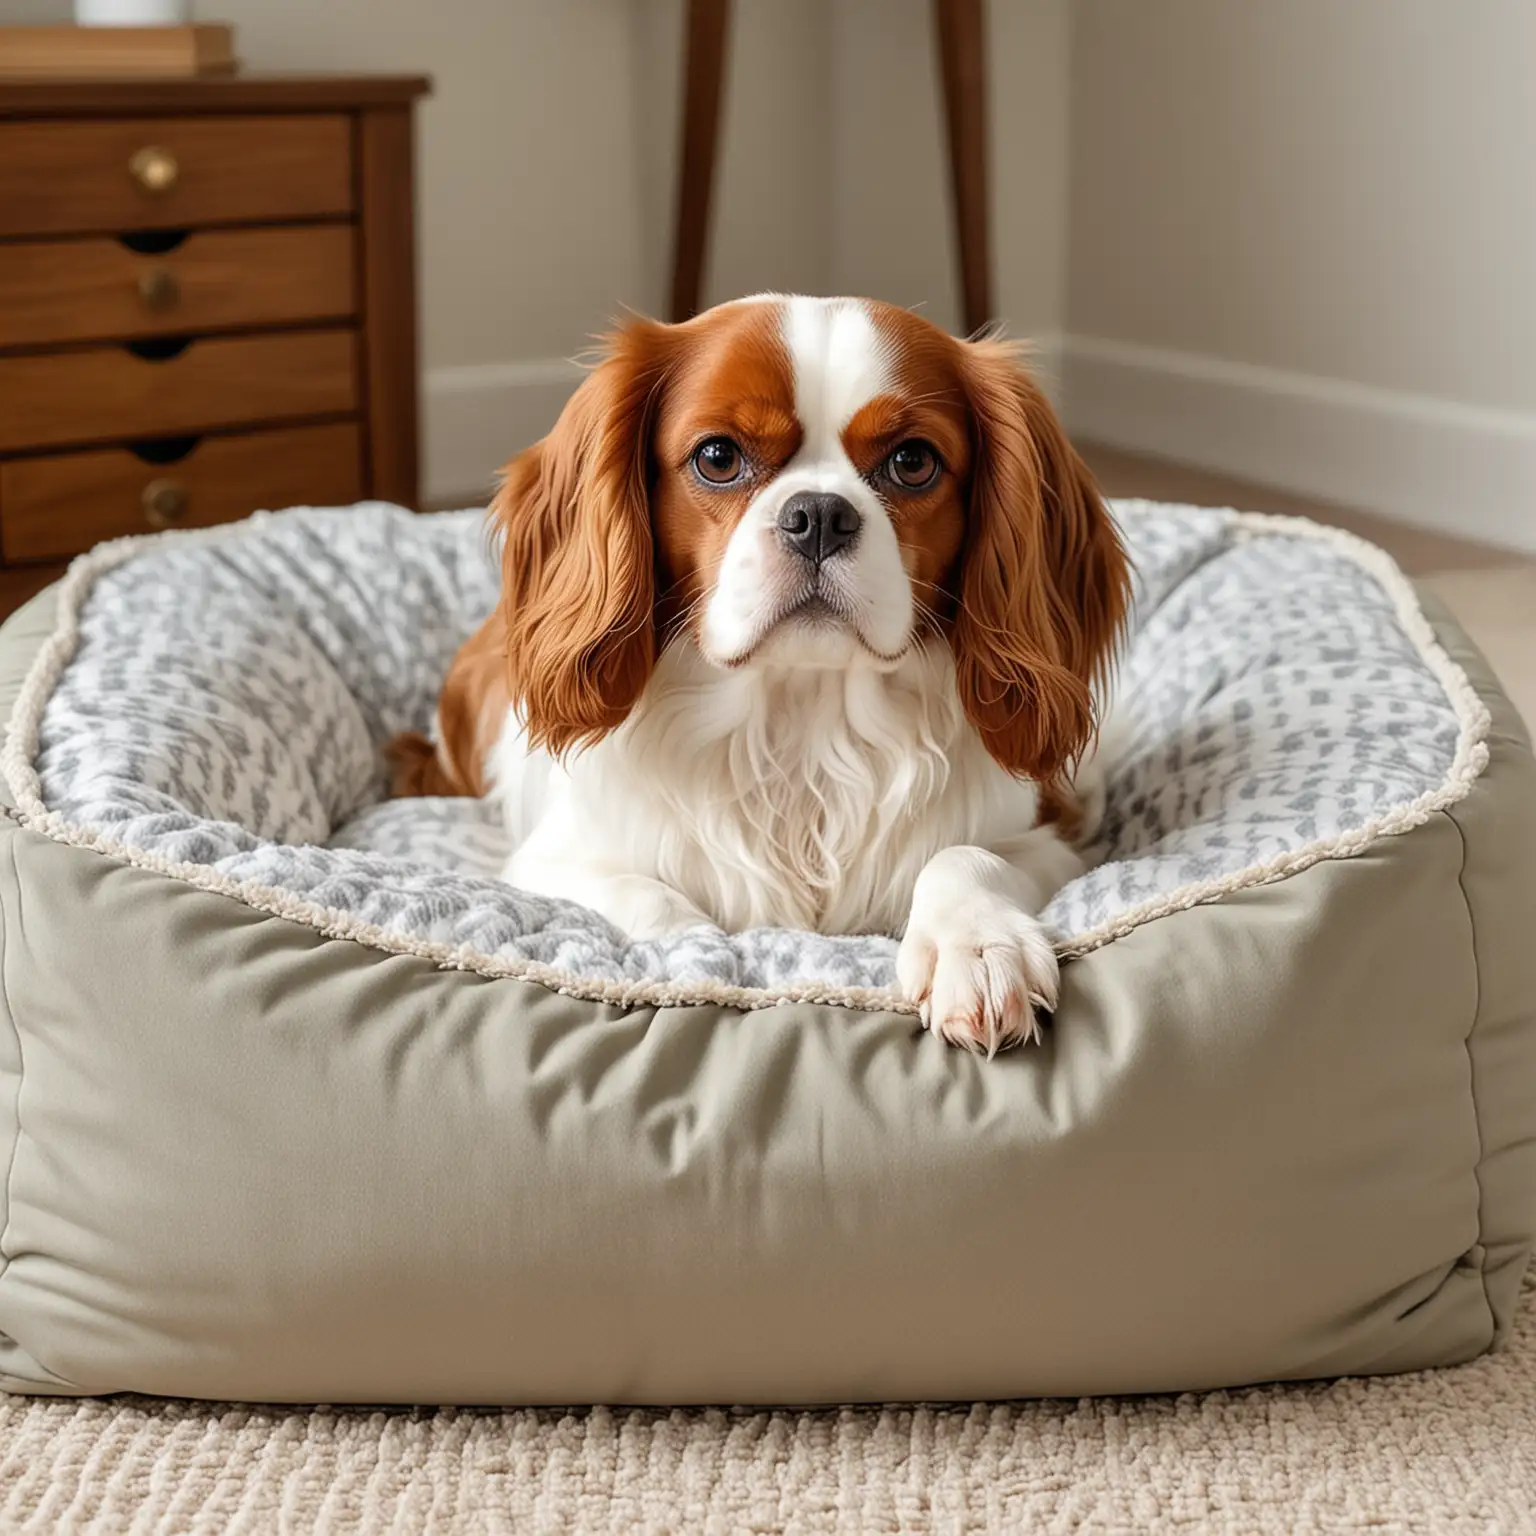 Cavalier King Charles Spaniel laying in a dog bed